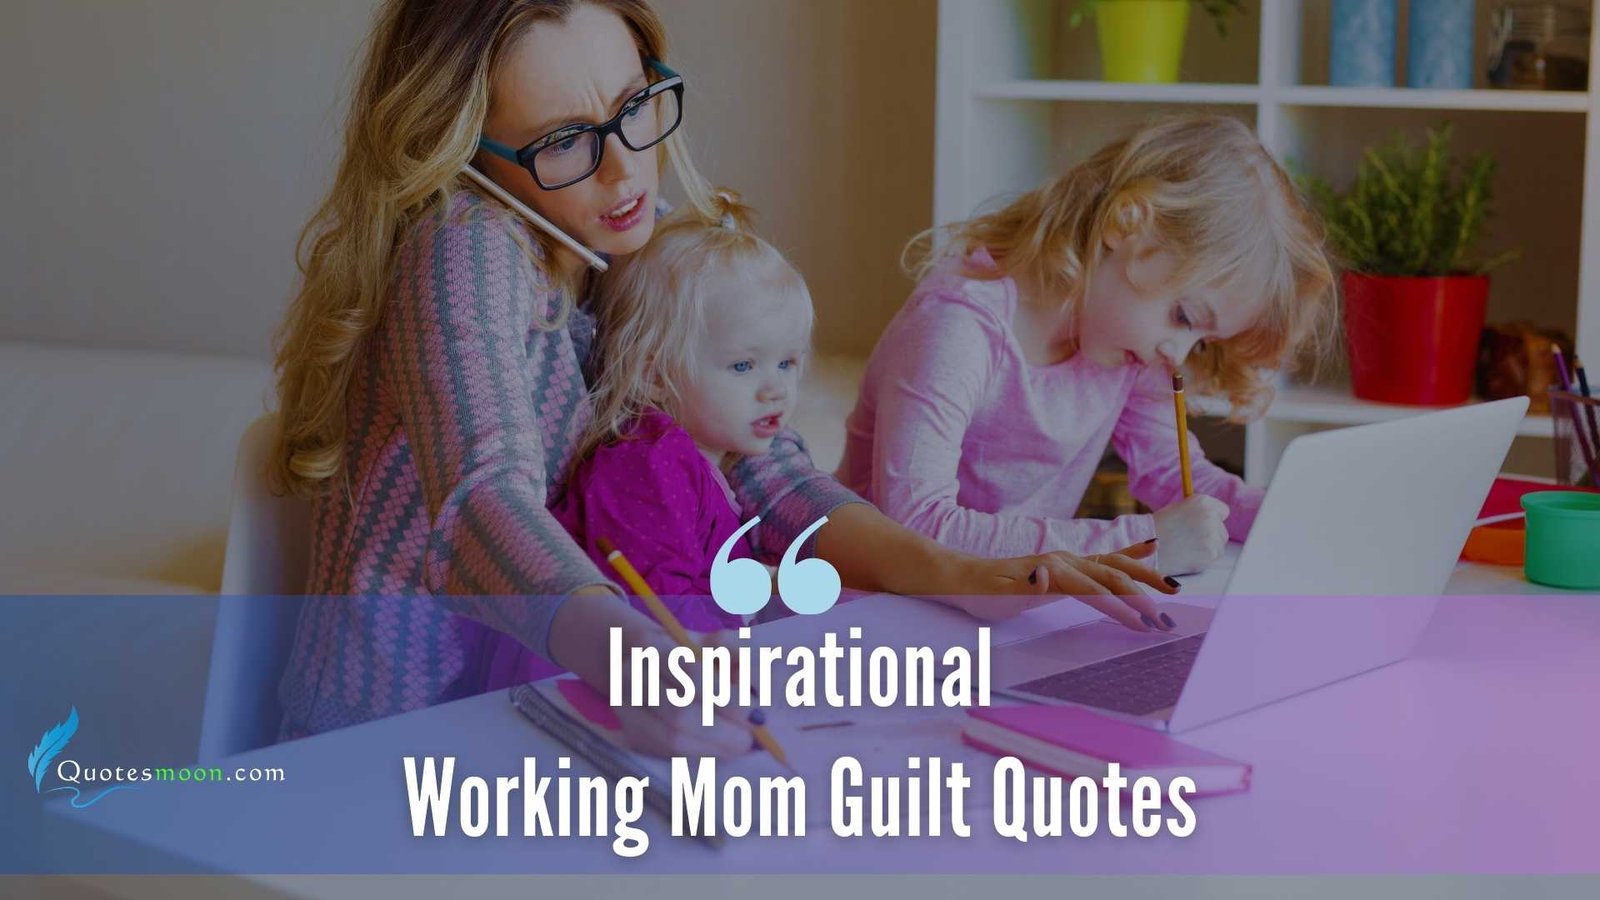 Inspirational Working Mom Guilt Quotes